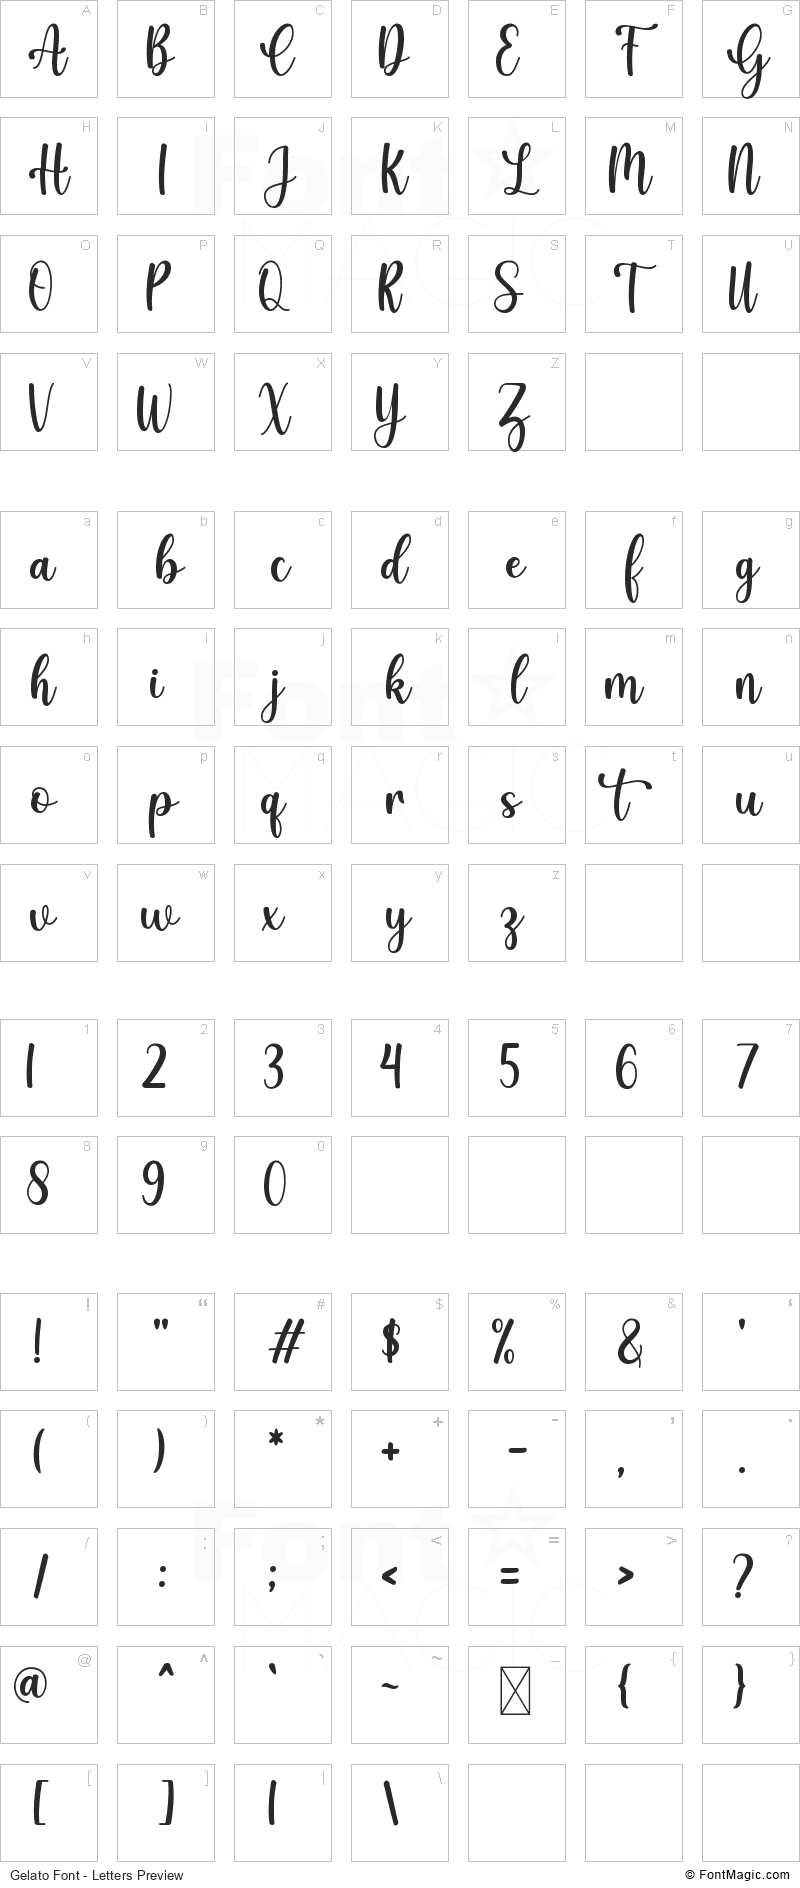 Gelato Font - All Latters Preview Chart